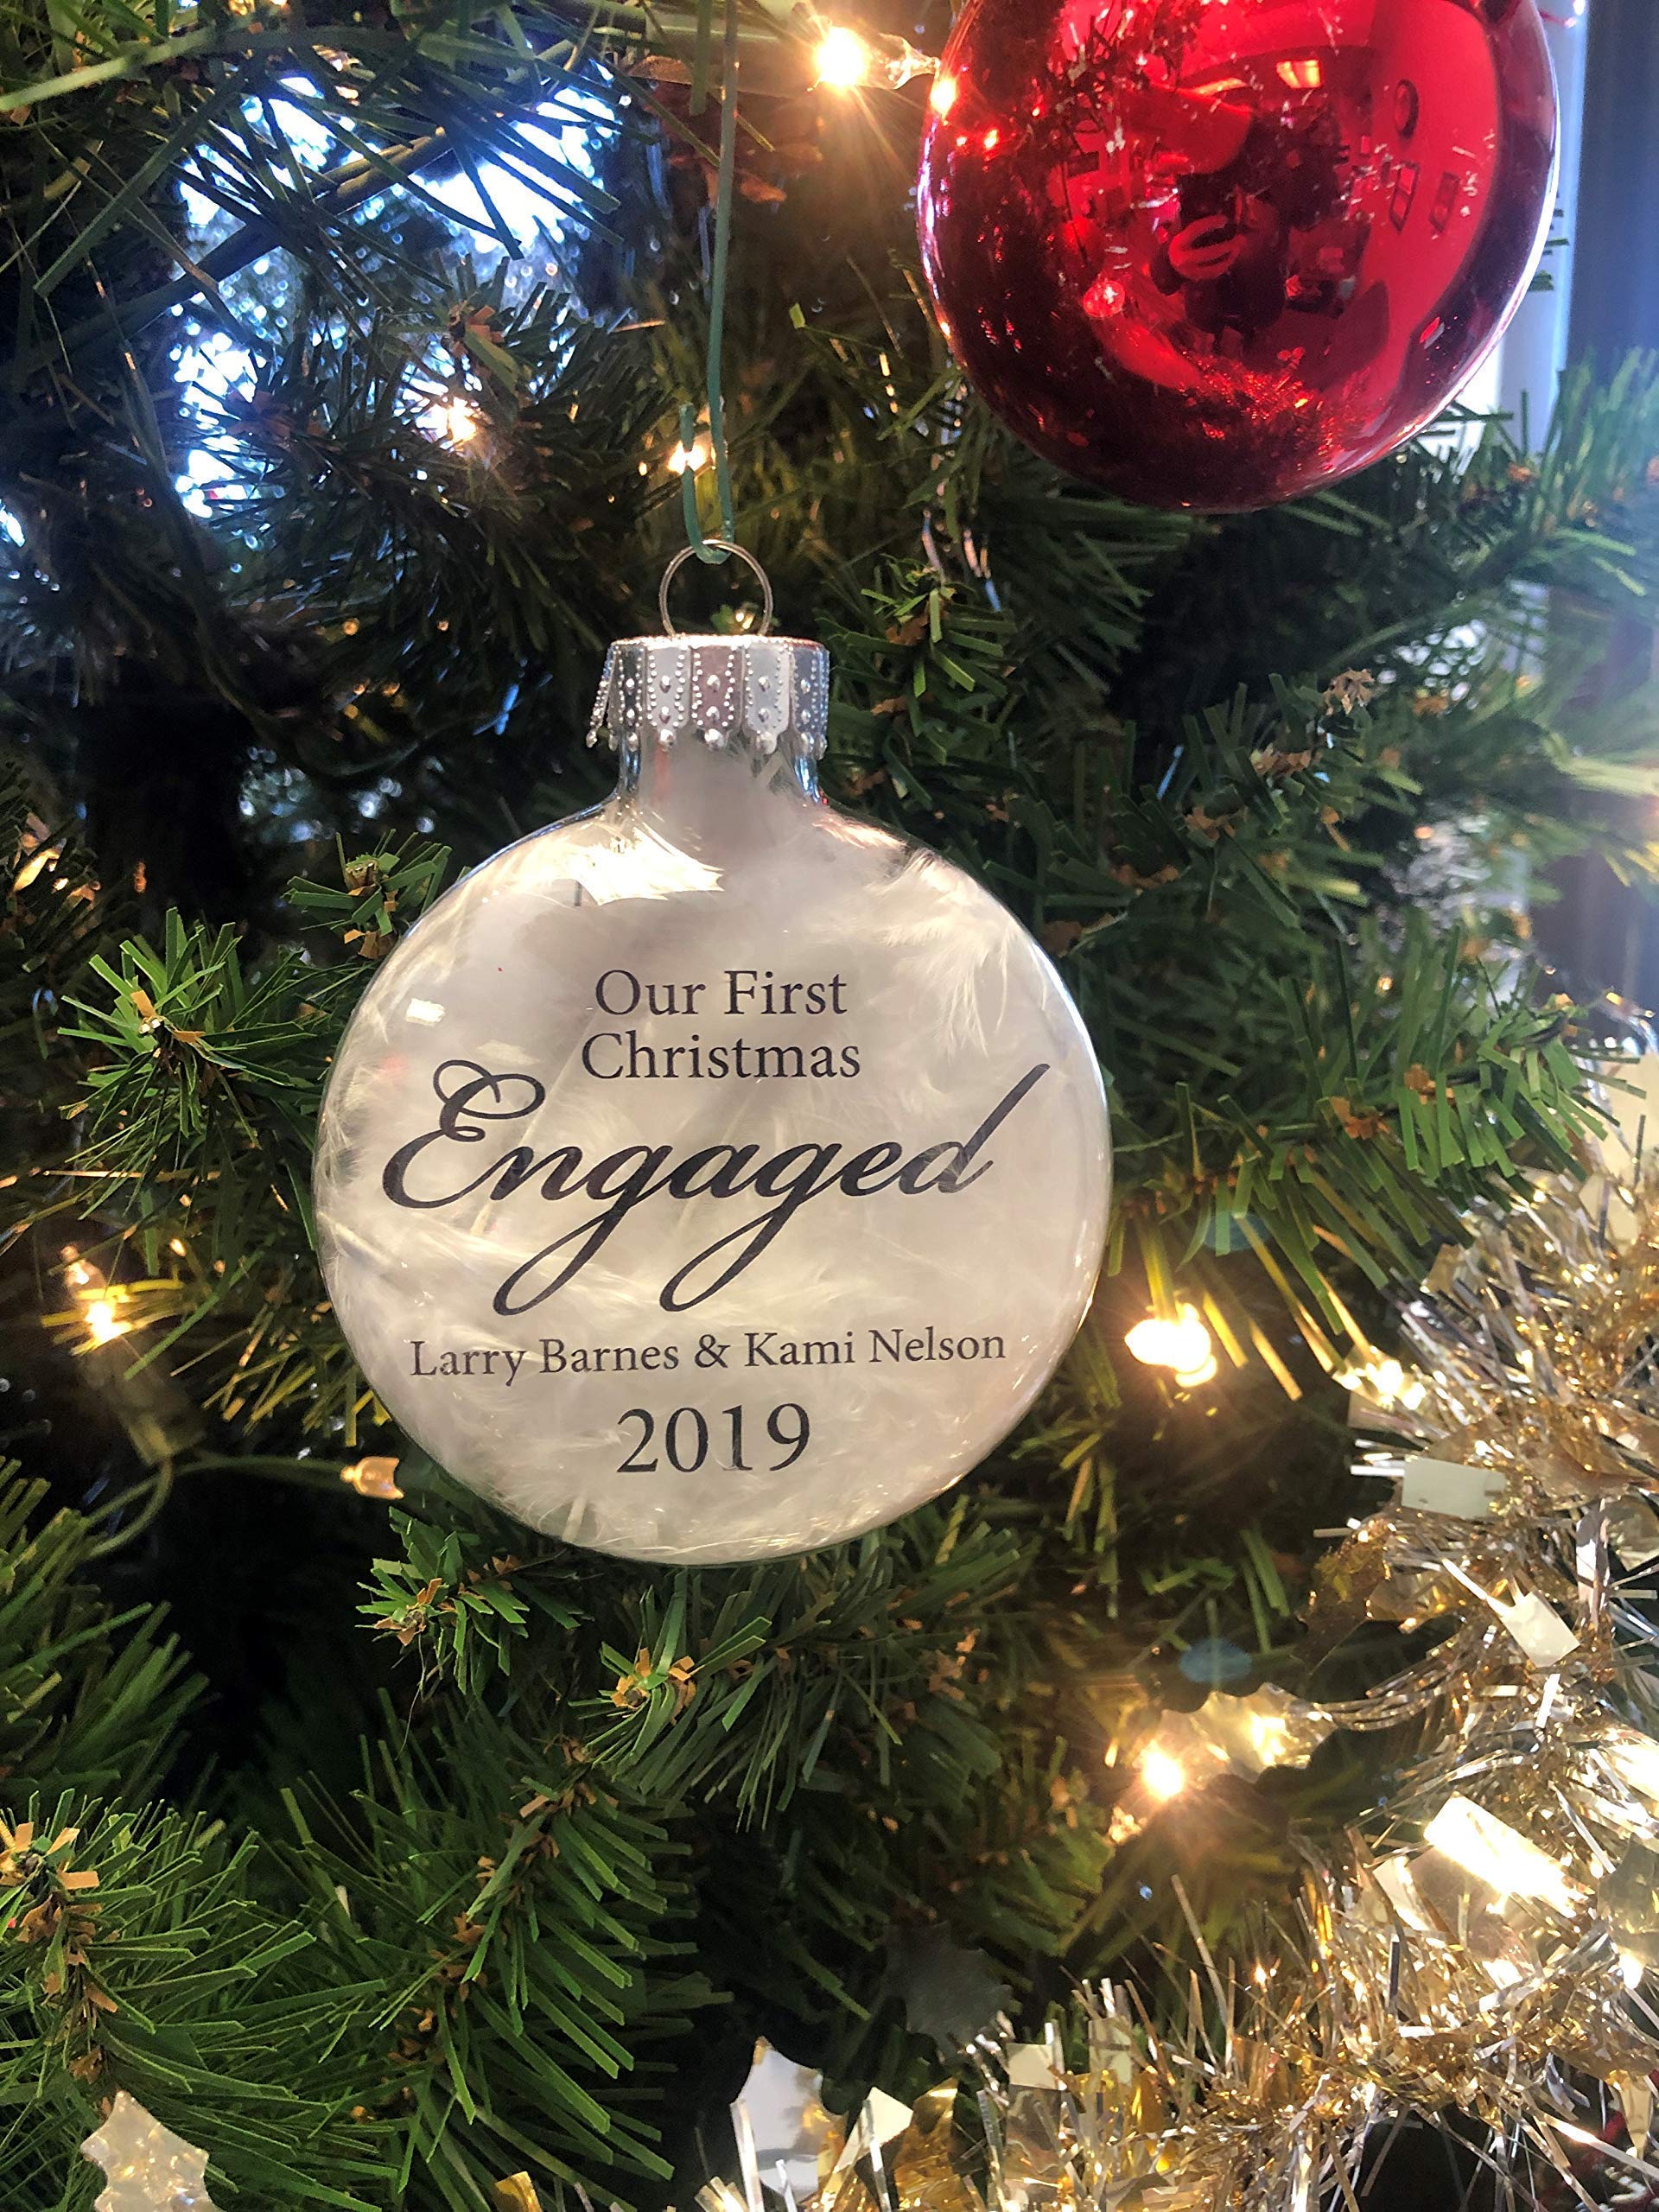 Our first Christmas Engaged ornament